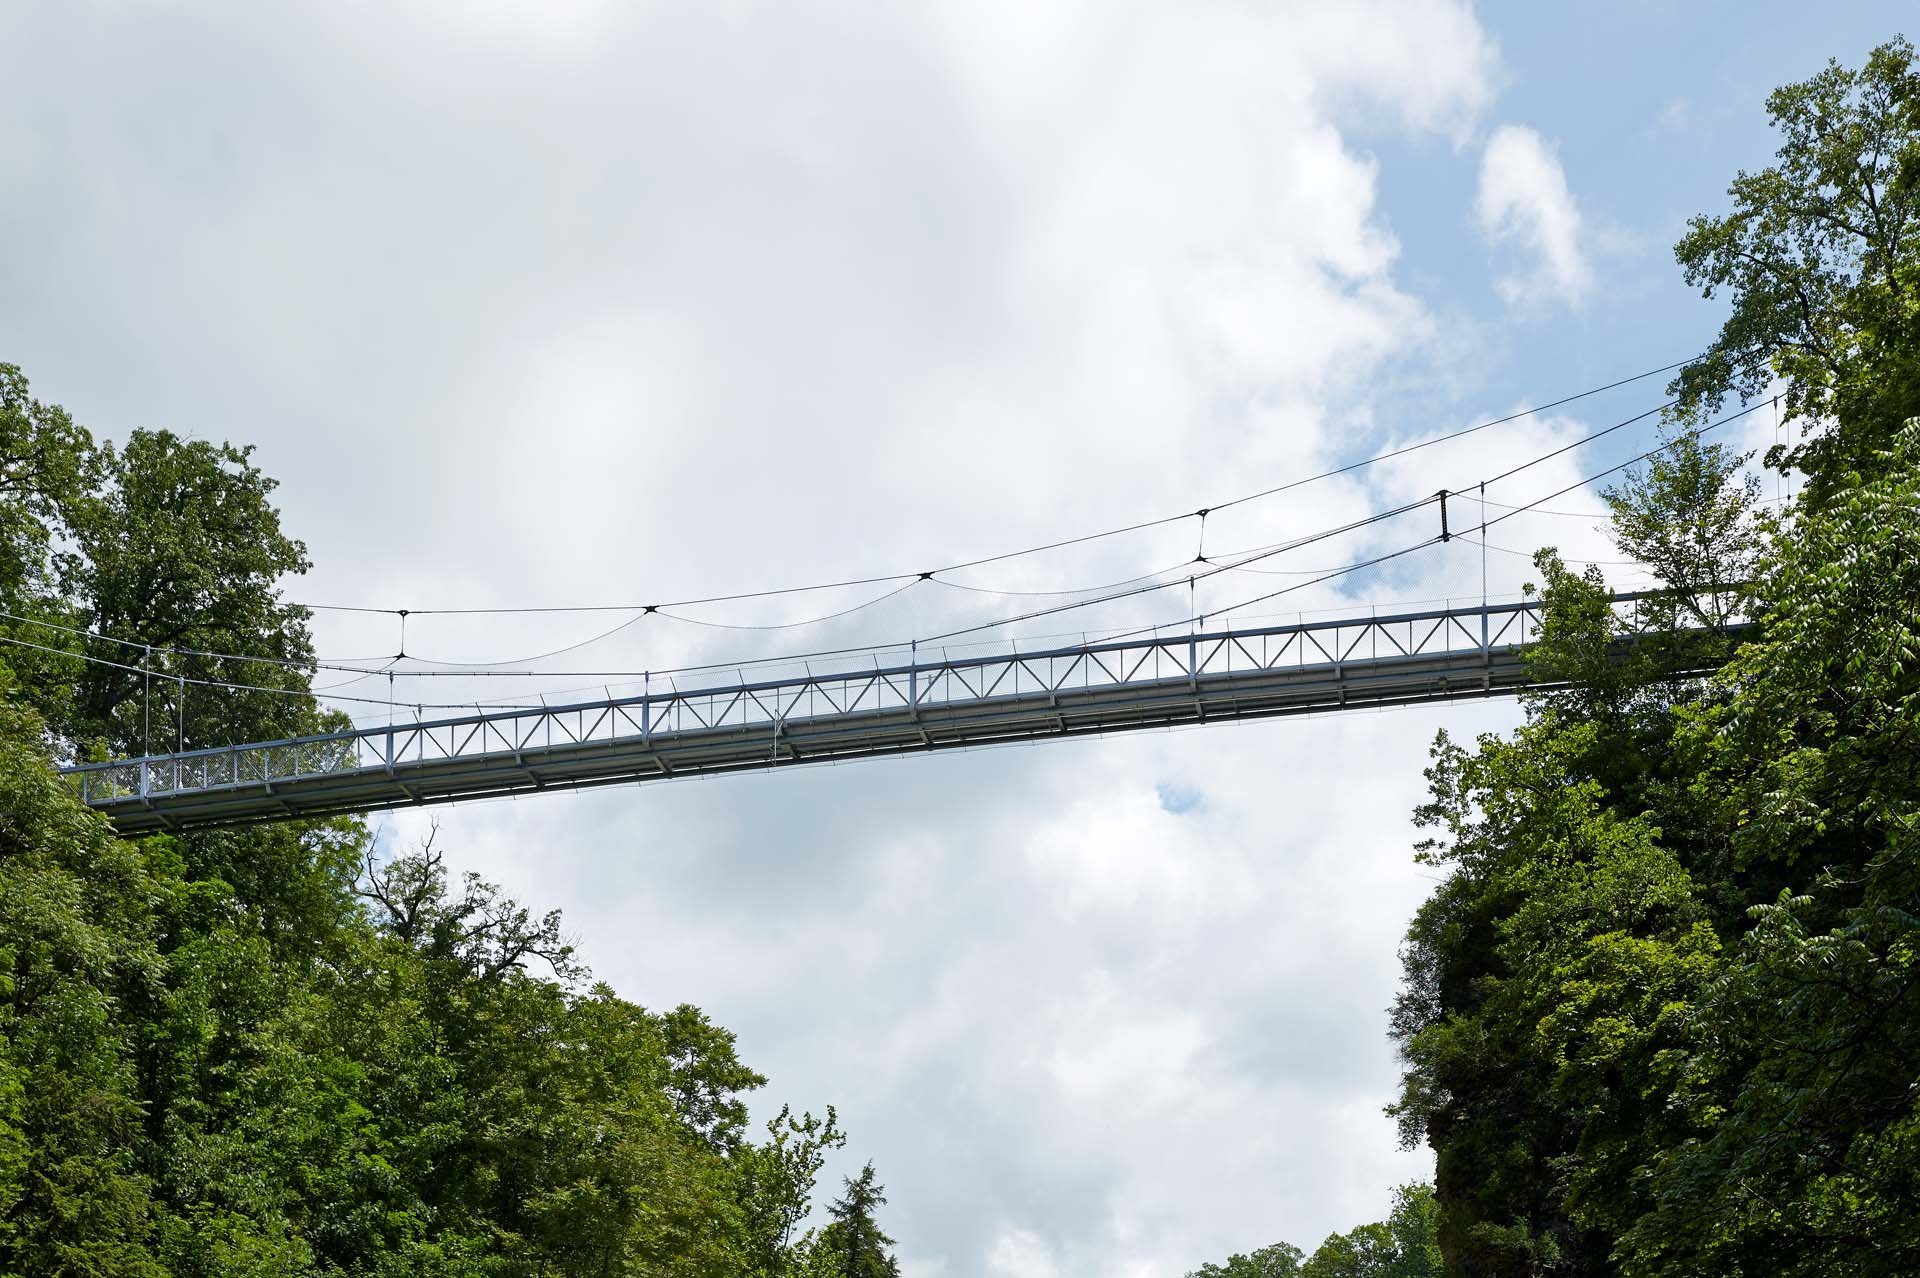 A bridge on the Cornell University Campus with a vertical safety net